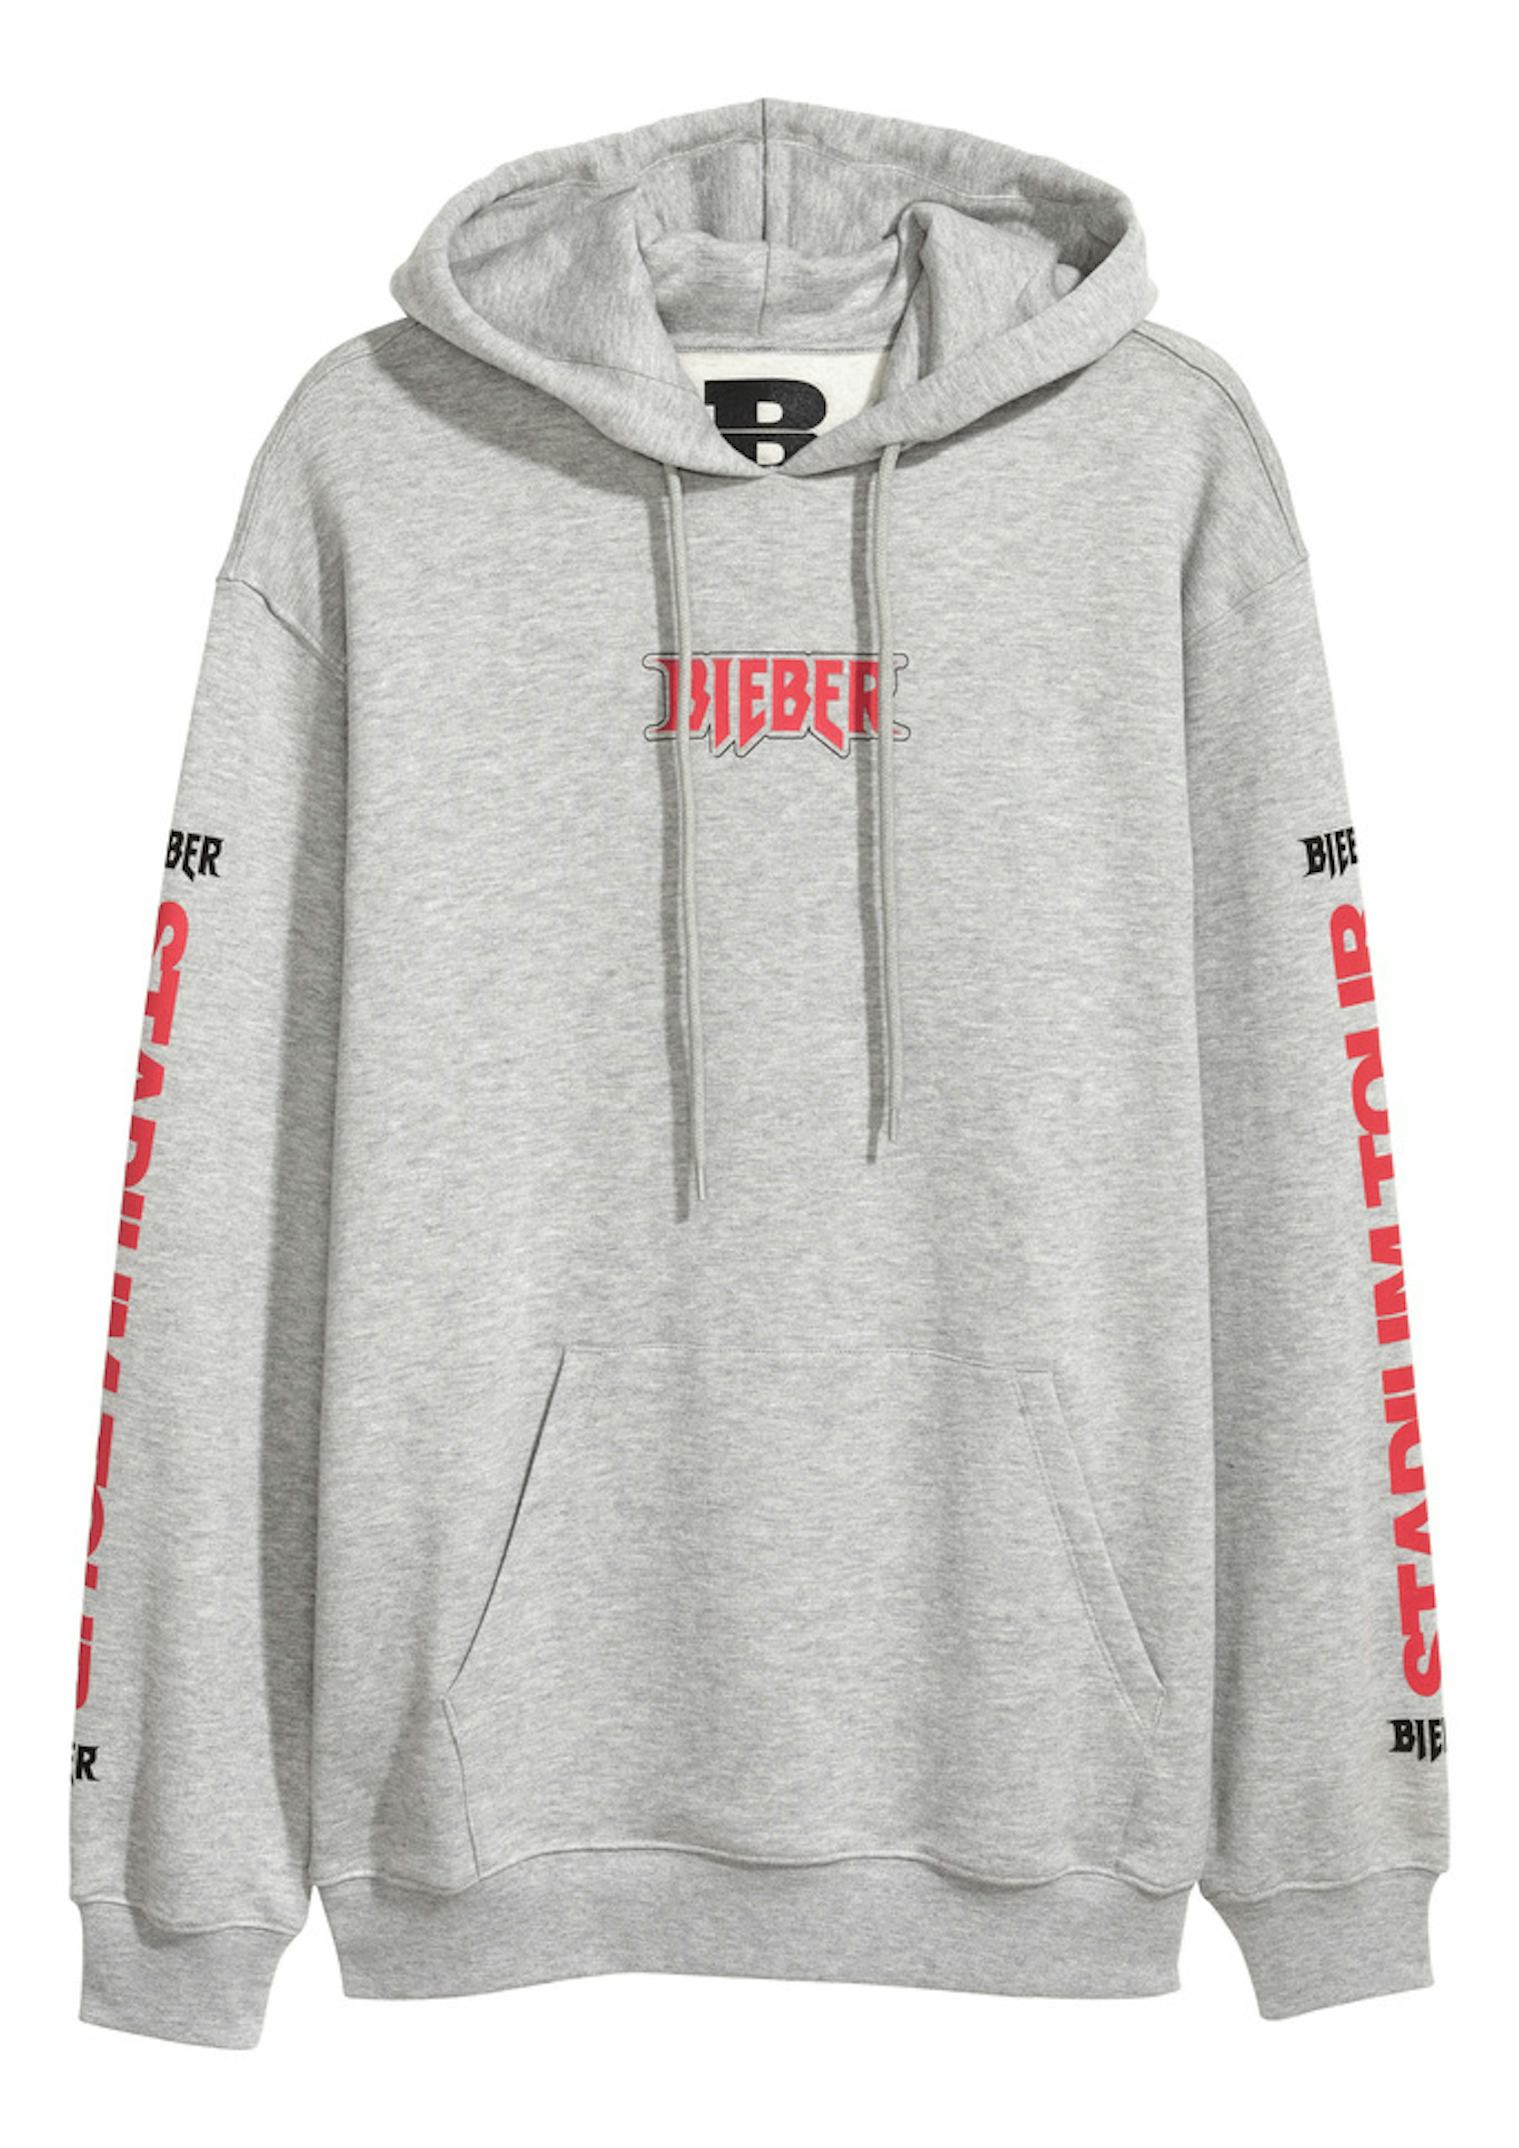 With No Tour Left, Justin Bieber And H&M Unveil A New Merch Collection